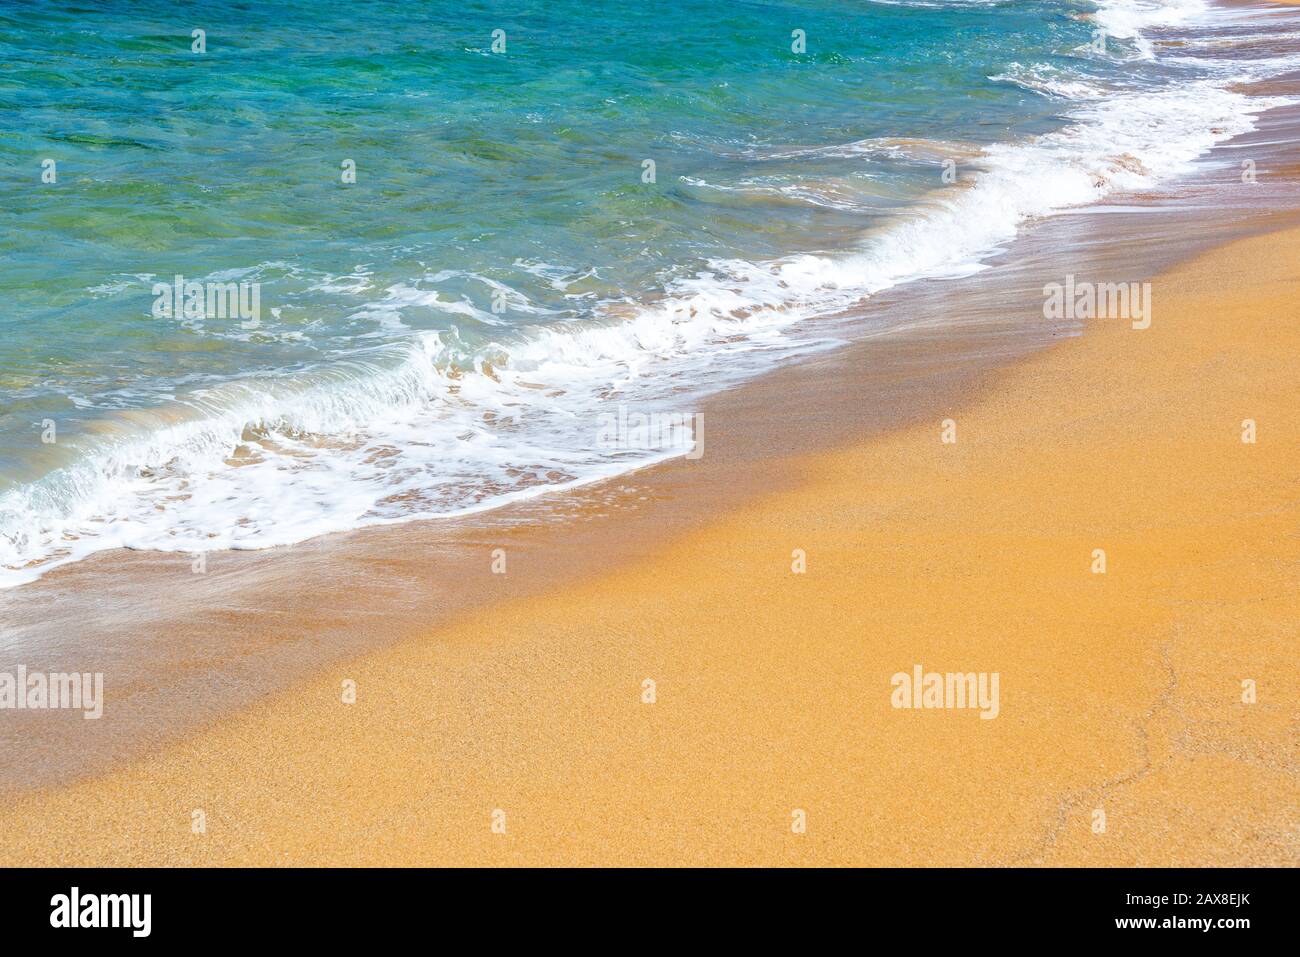 Waves on a beach with orange sand and blue water Stock Photo